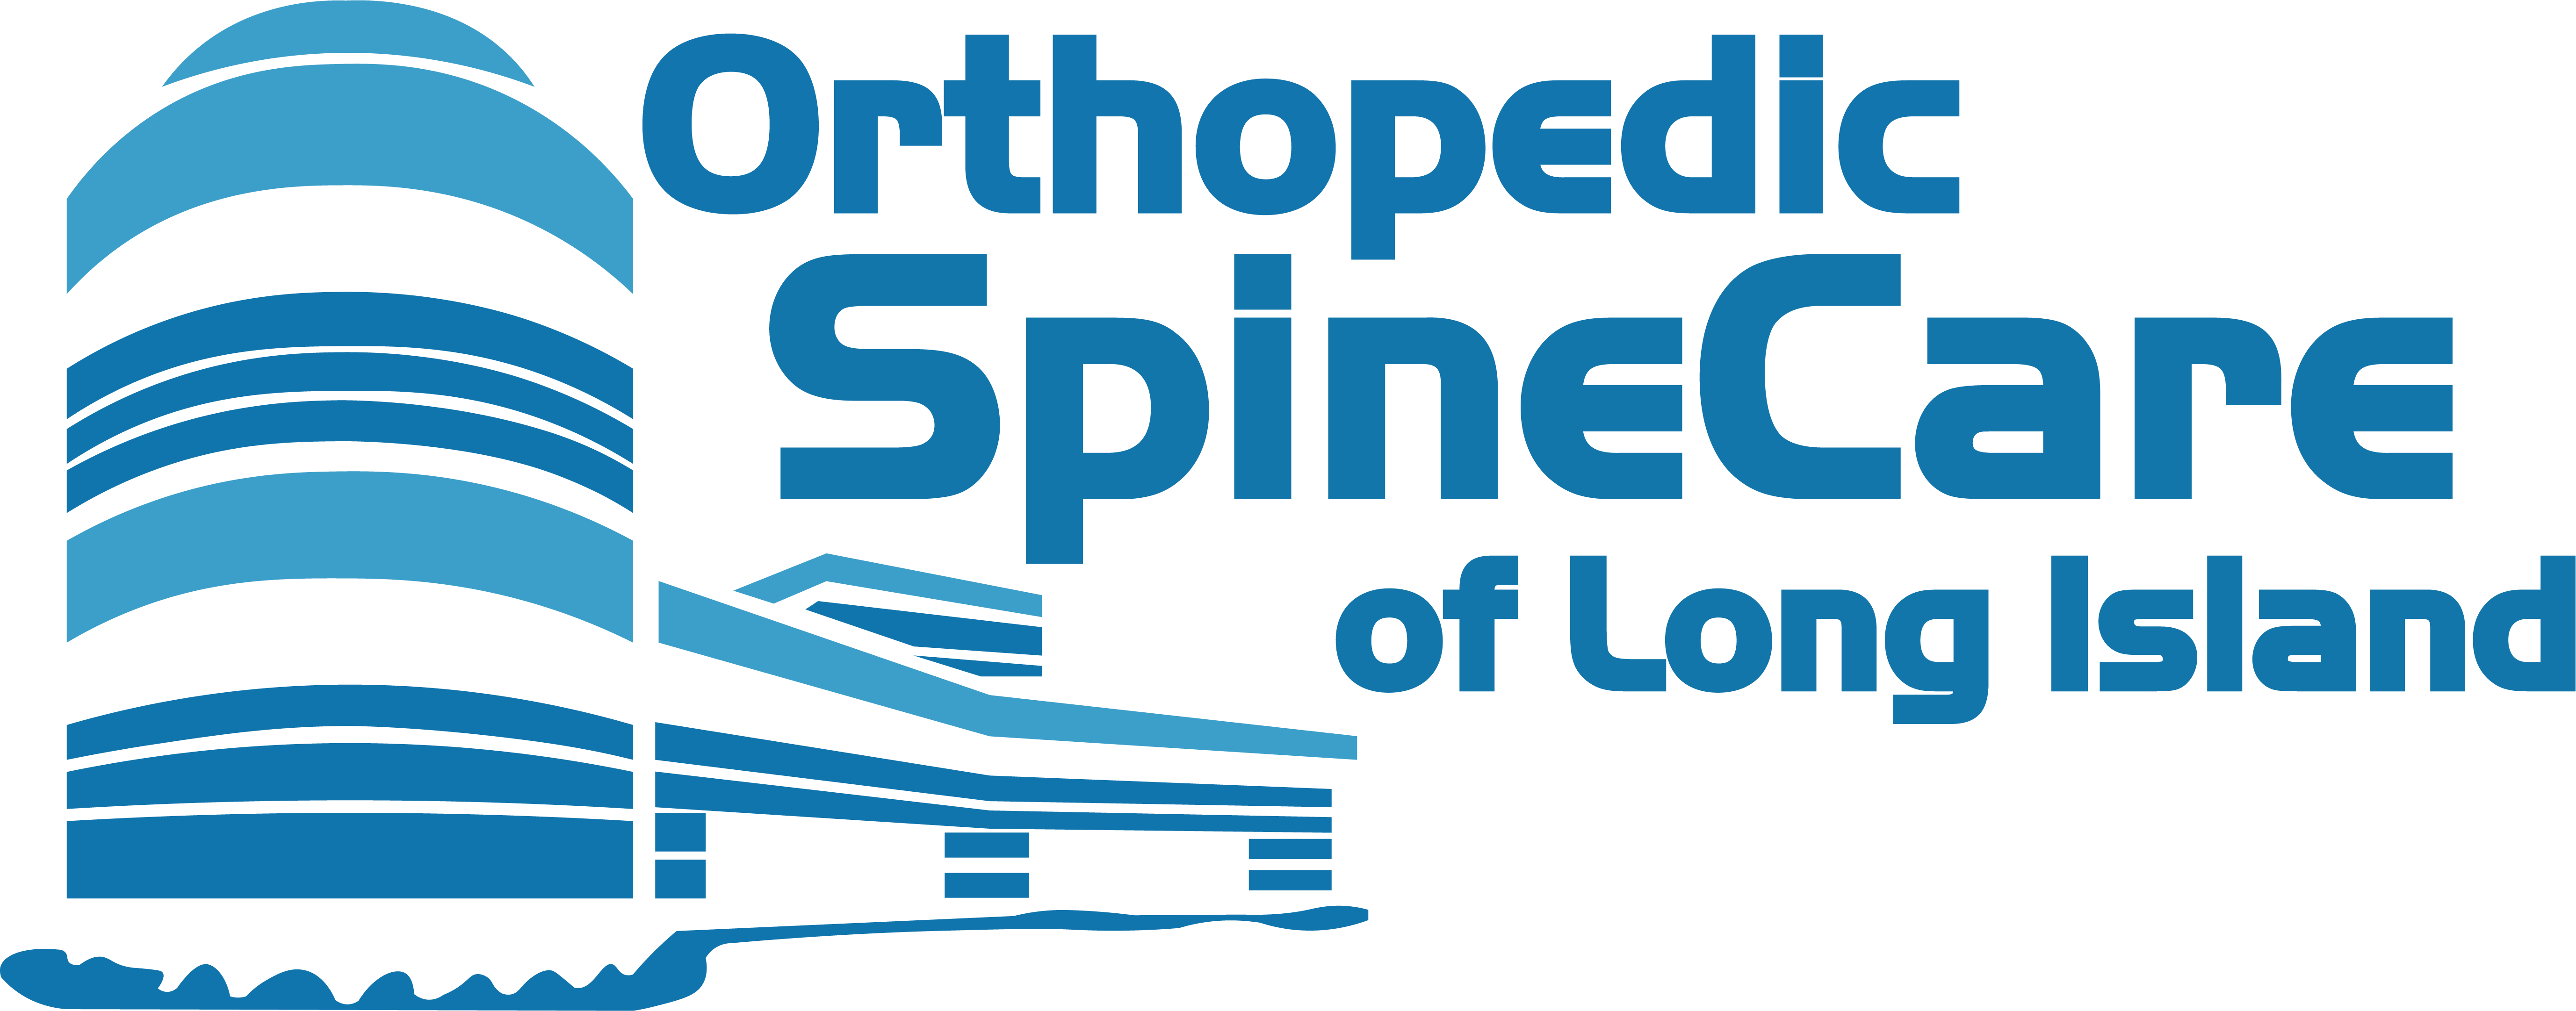 The logo for Orthopedic Spine Care of Long Island.